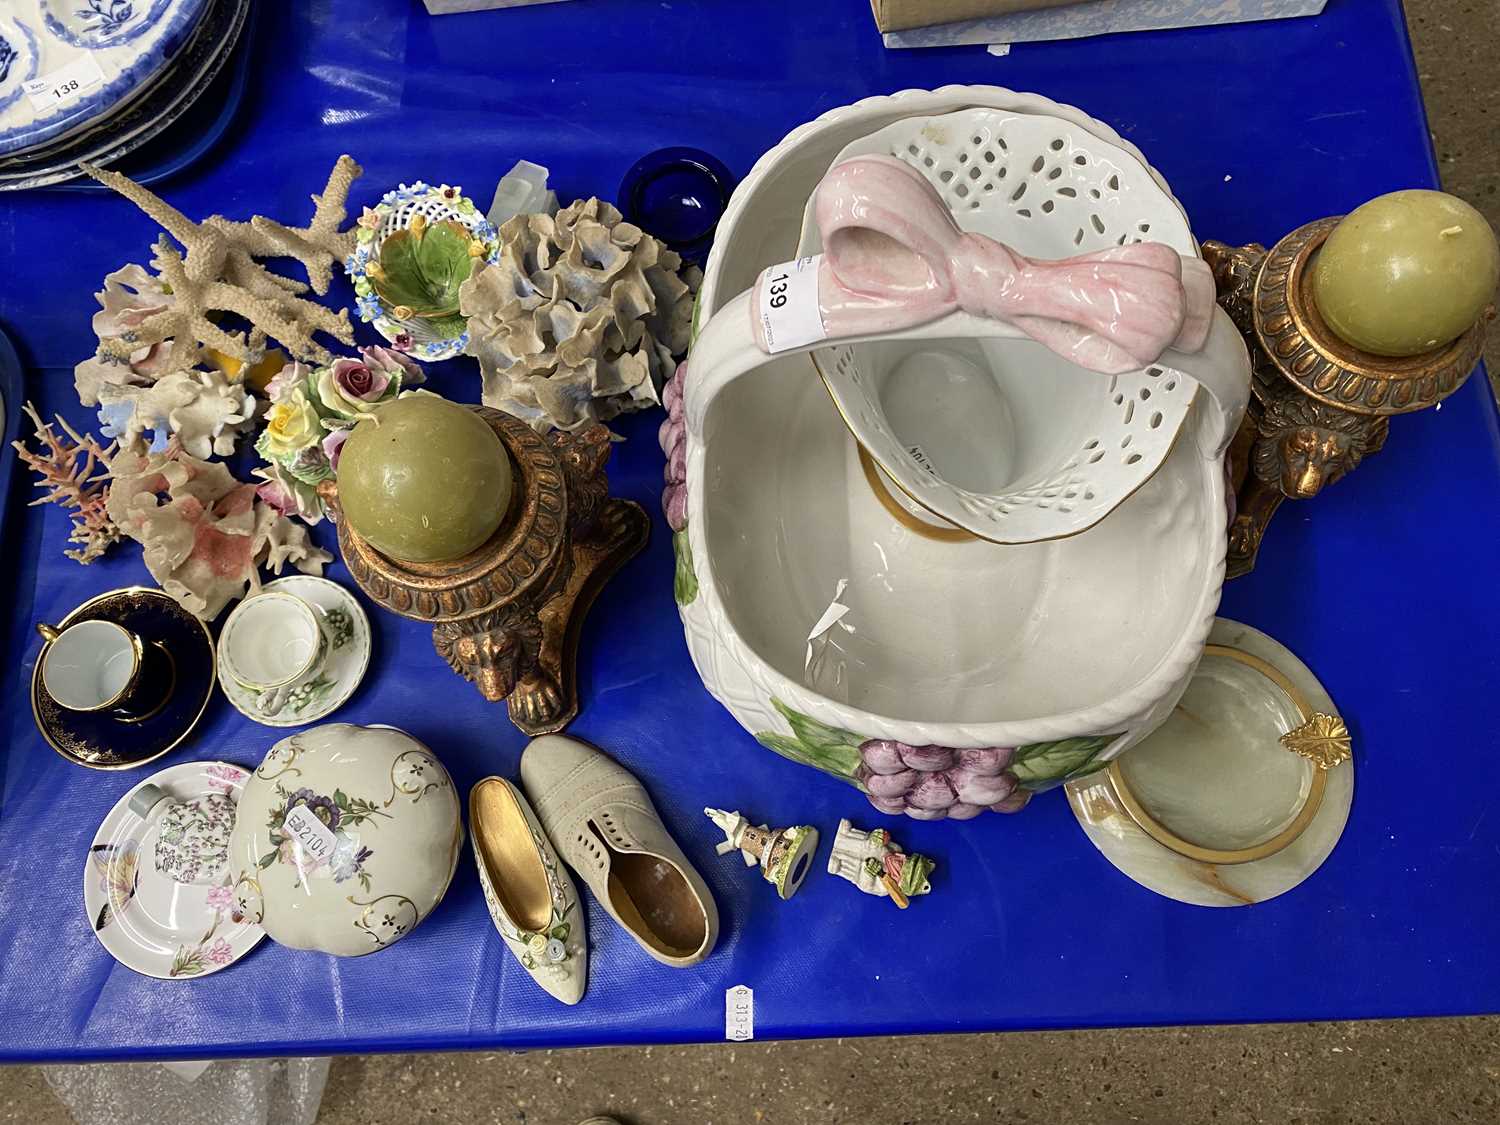 Mixed Lot: Various floral ornaments, candle stands and other assorted items